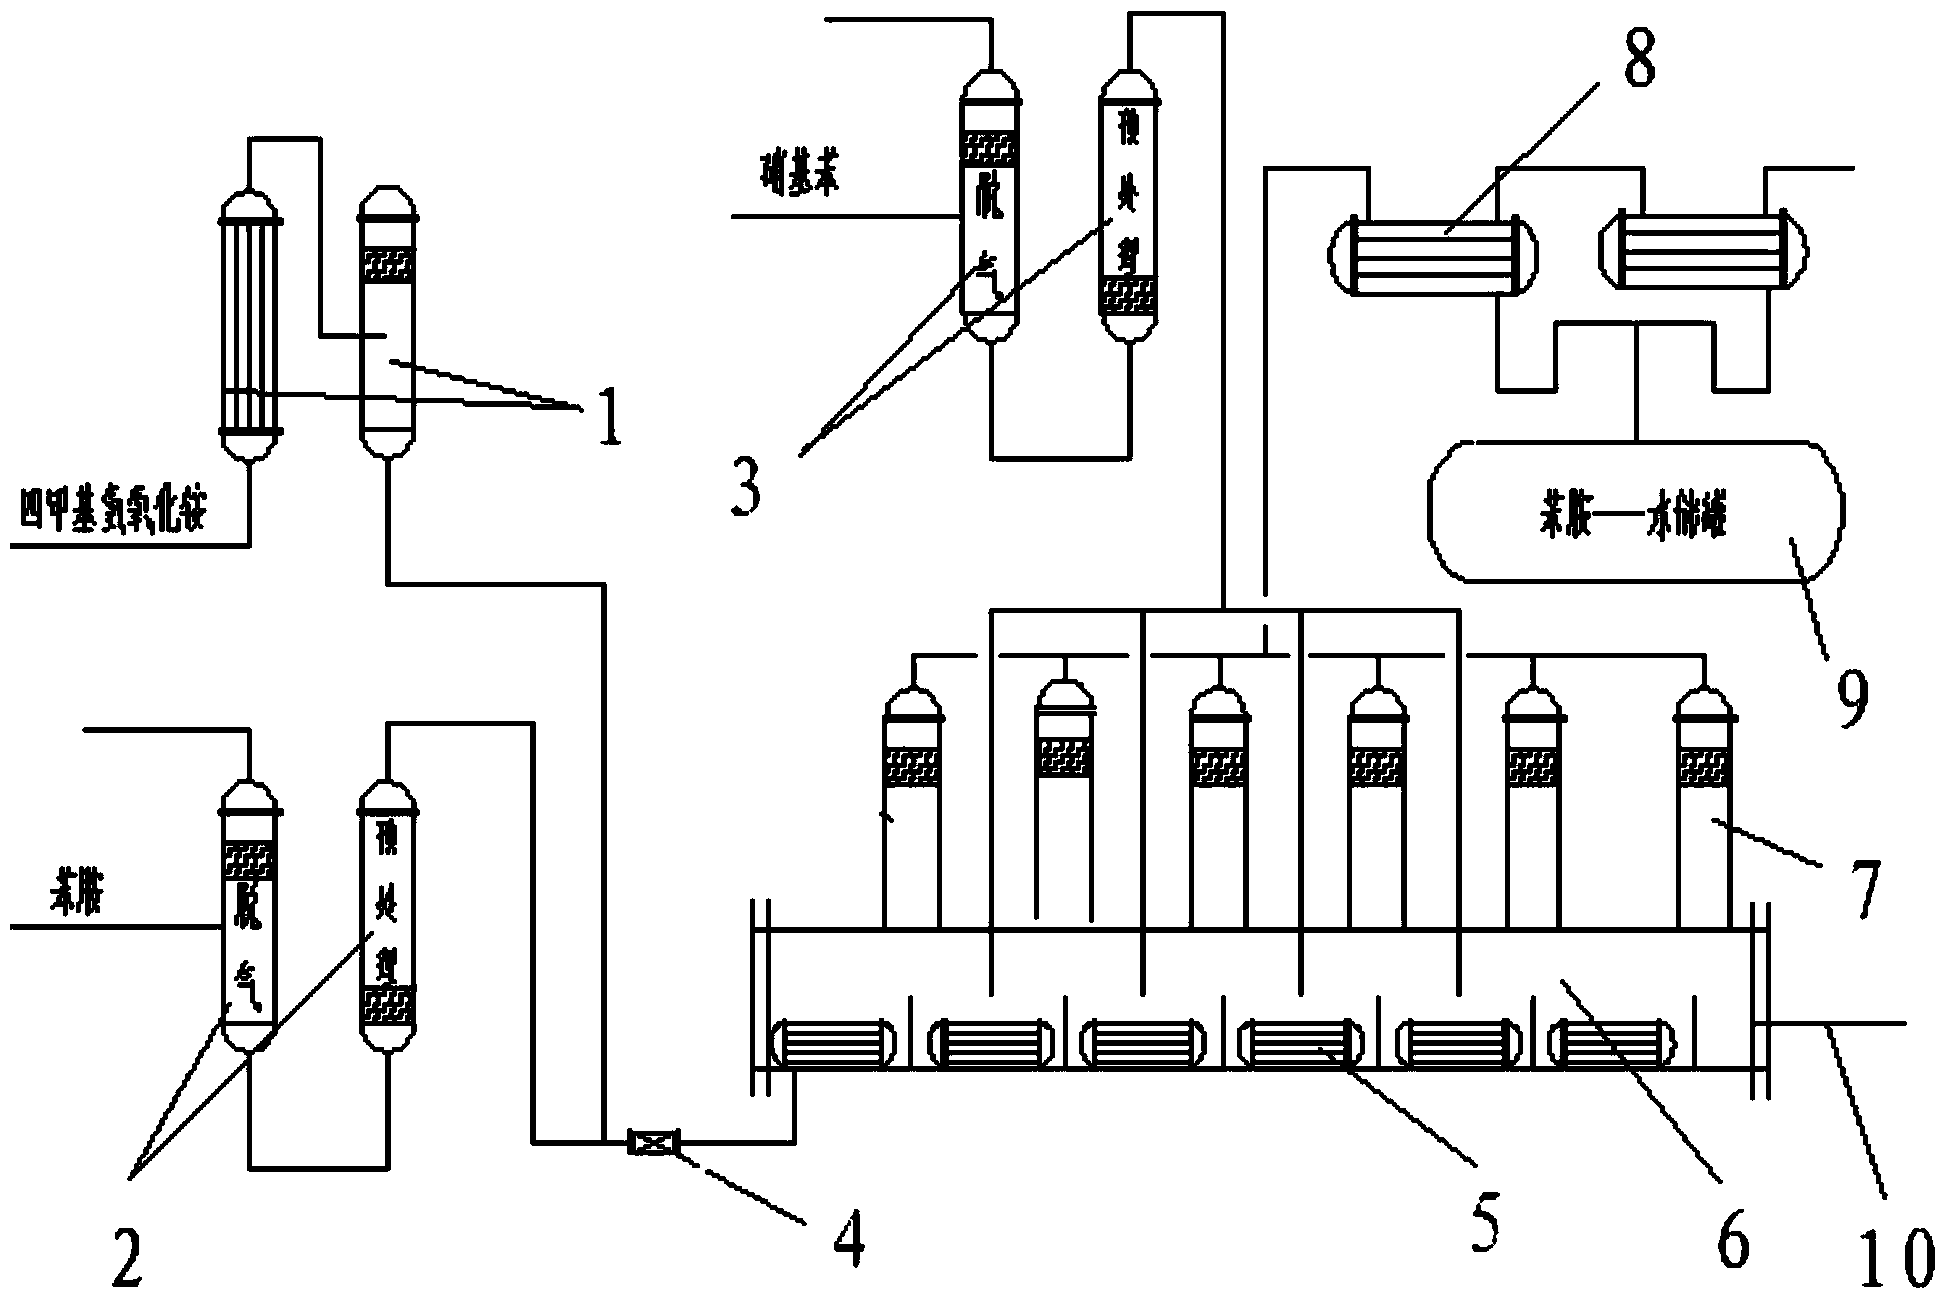 Production equipment and production technology of precursor of 4-aminodiphenylamine